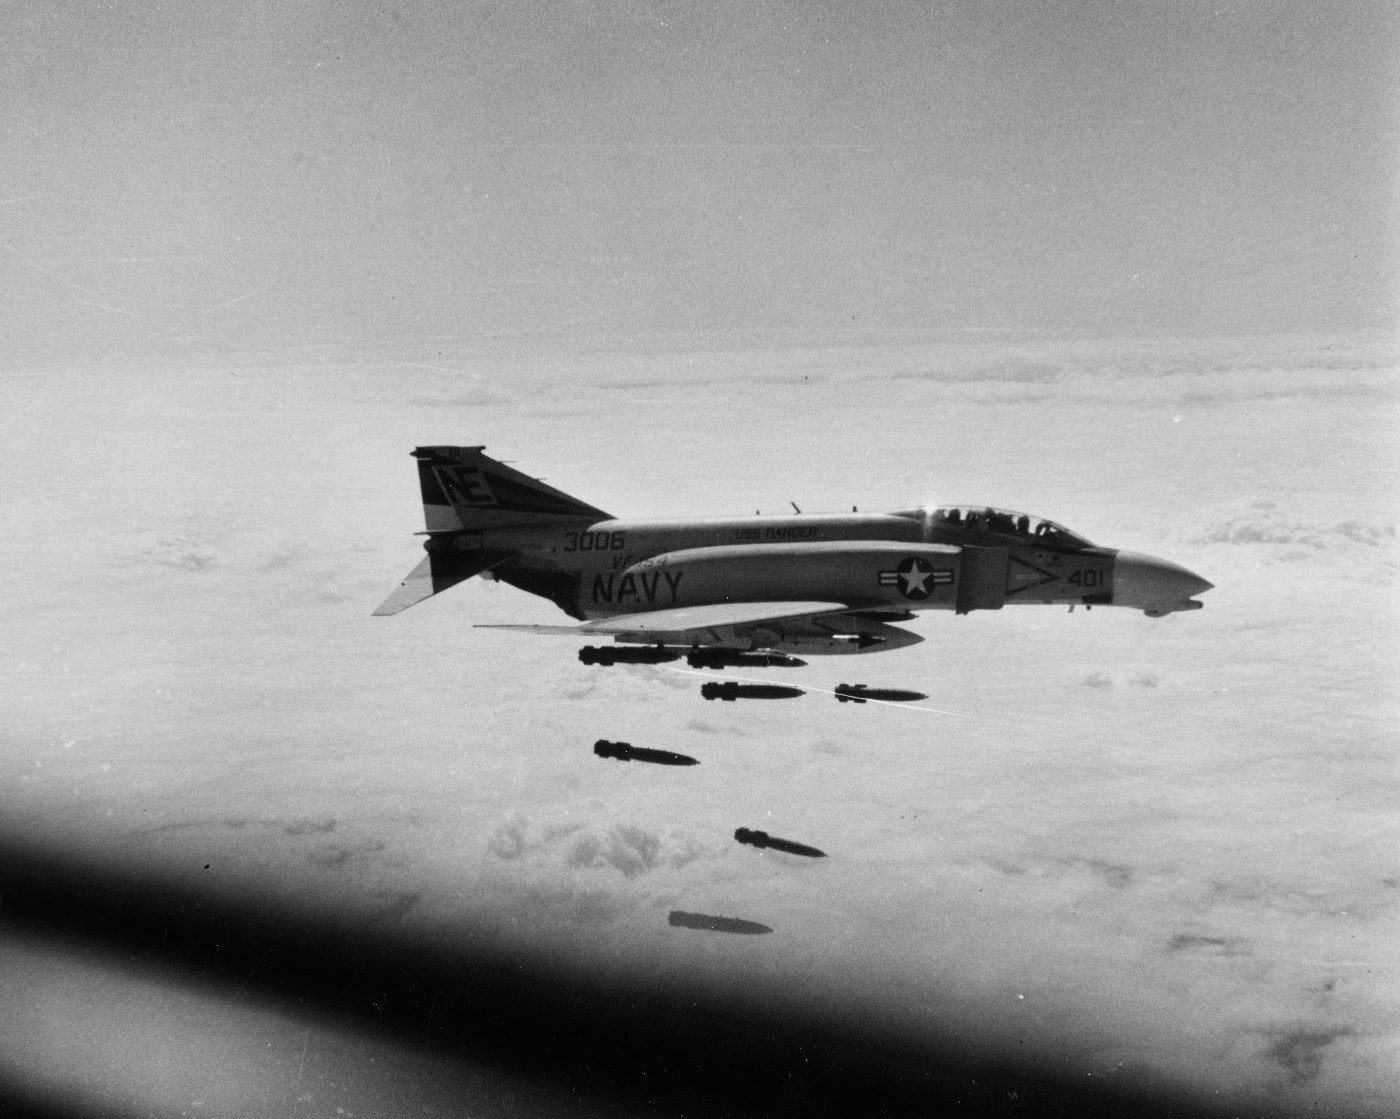 us navy f-4 provides air support to 3rd marine division